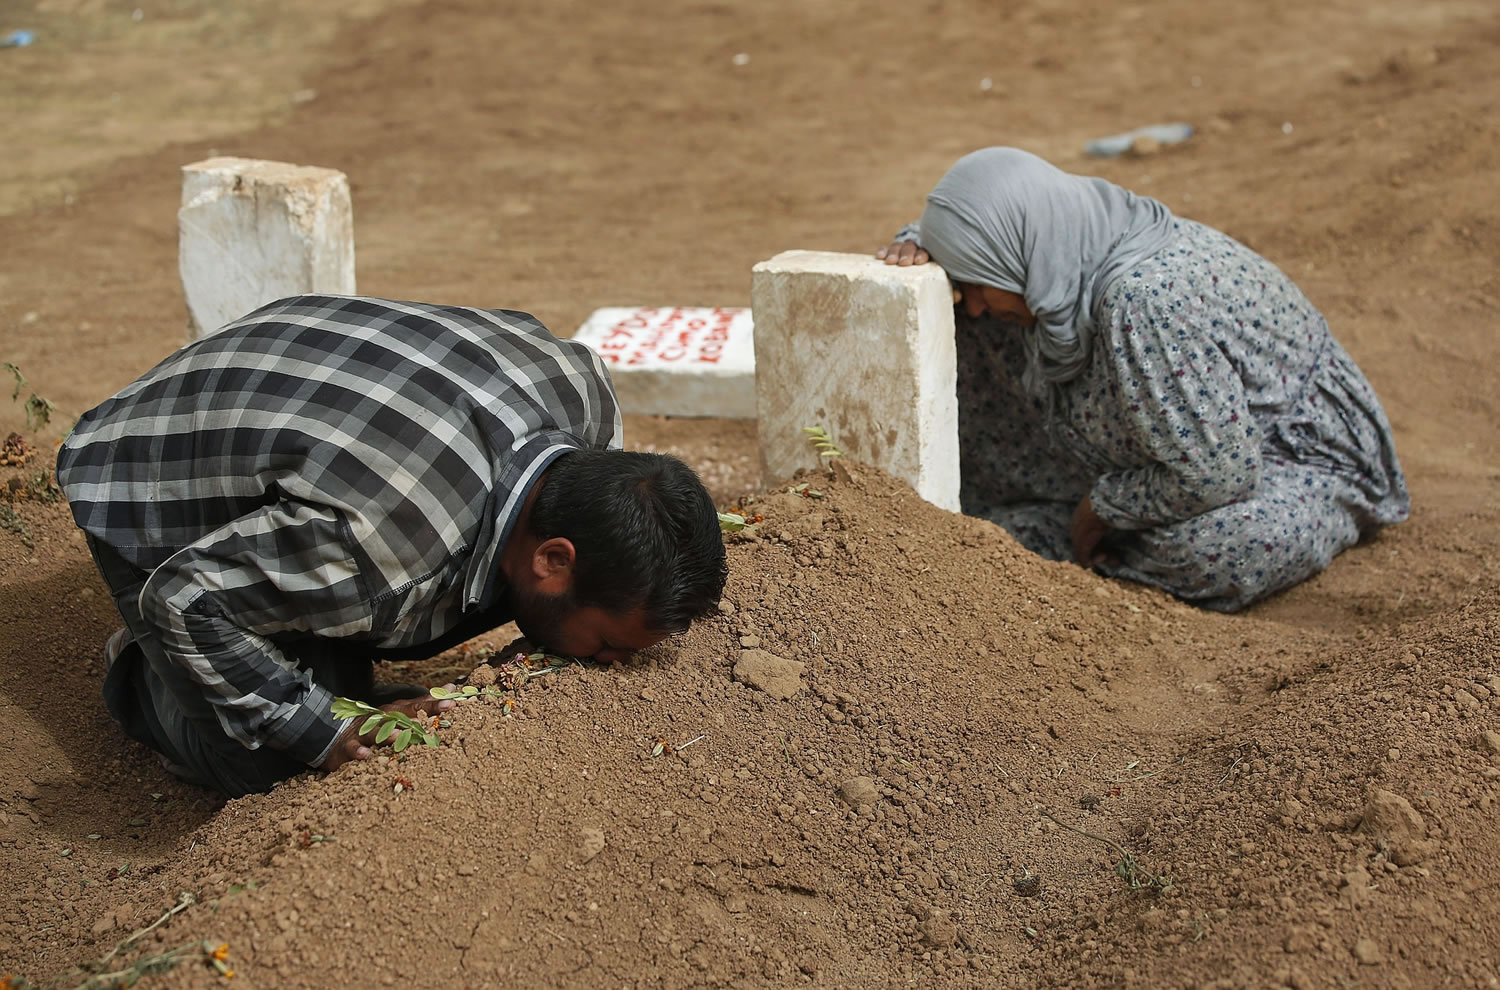 Kurdish Rabia Ali, right, accompanied by her son, Ali Mehmud, mourn at the grave of her son Seydo Mehmud 'Curo,' a Kurdish fighter who was killed in the fighting with the militants of the Islamic State group in Kobani, Syria, and was buried at a cemetery in Suruc, Turkey.